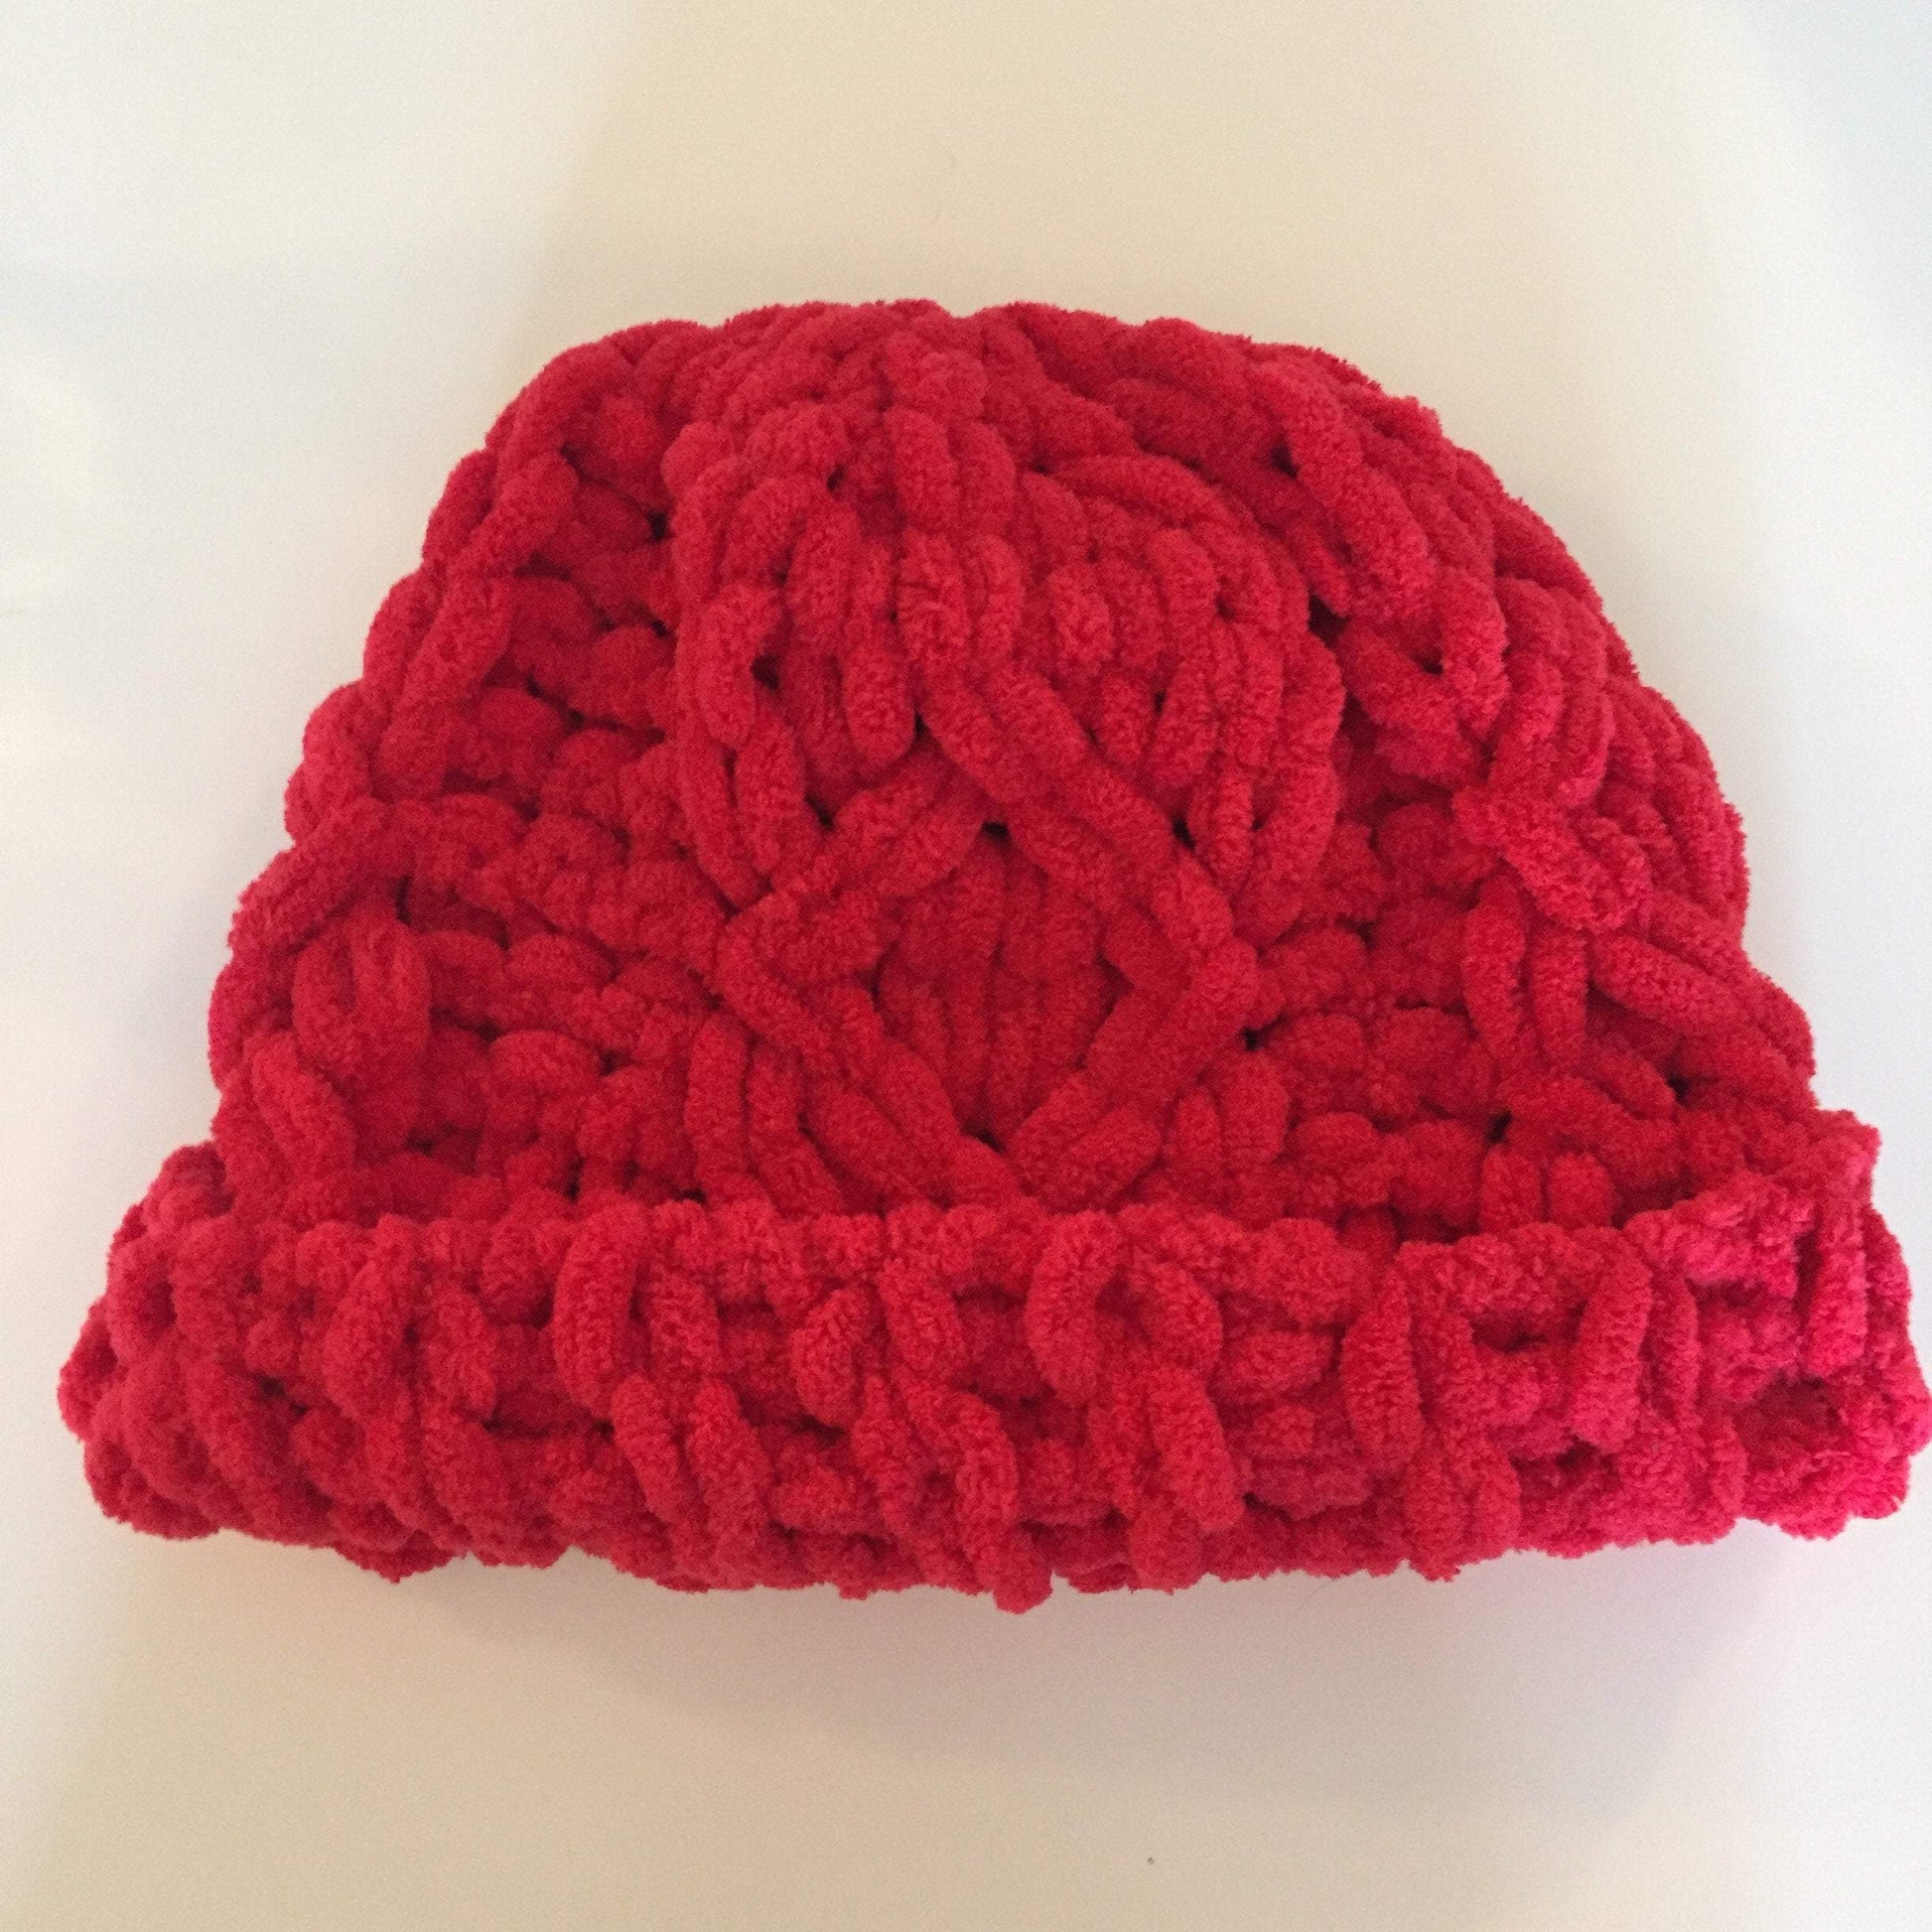 Soft Knitted Hat with Rolled Brim - ILoveMyBlanket